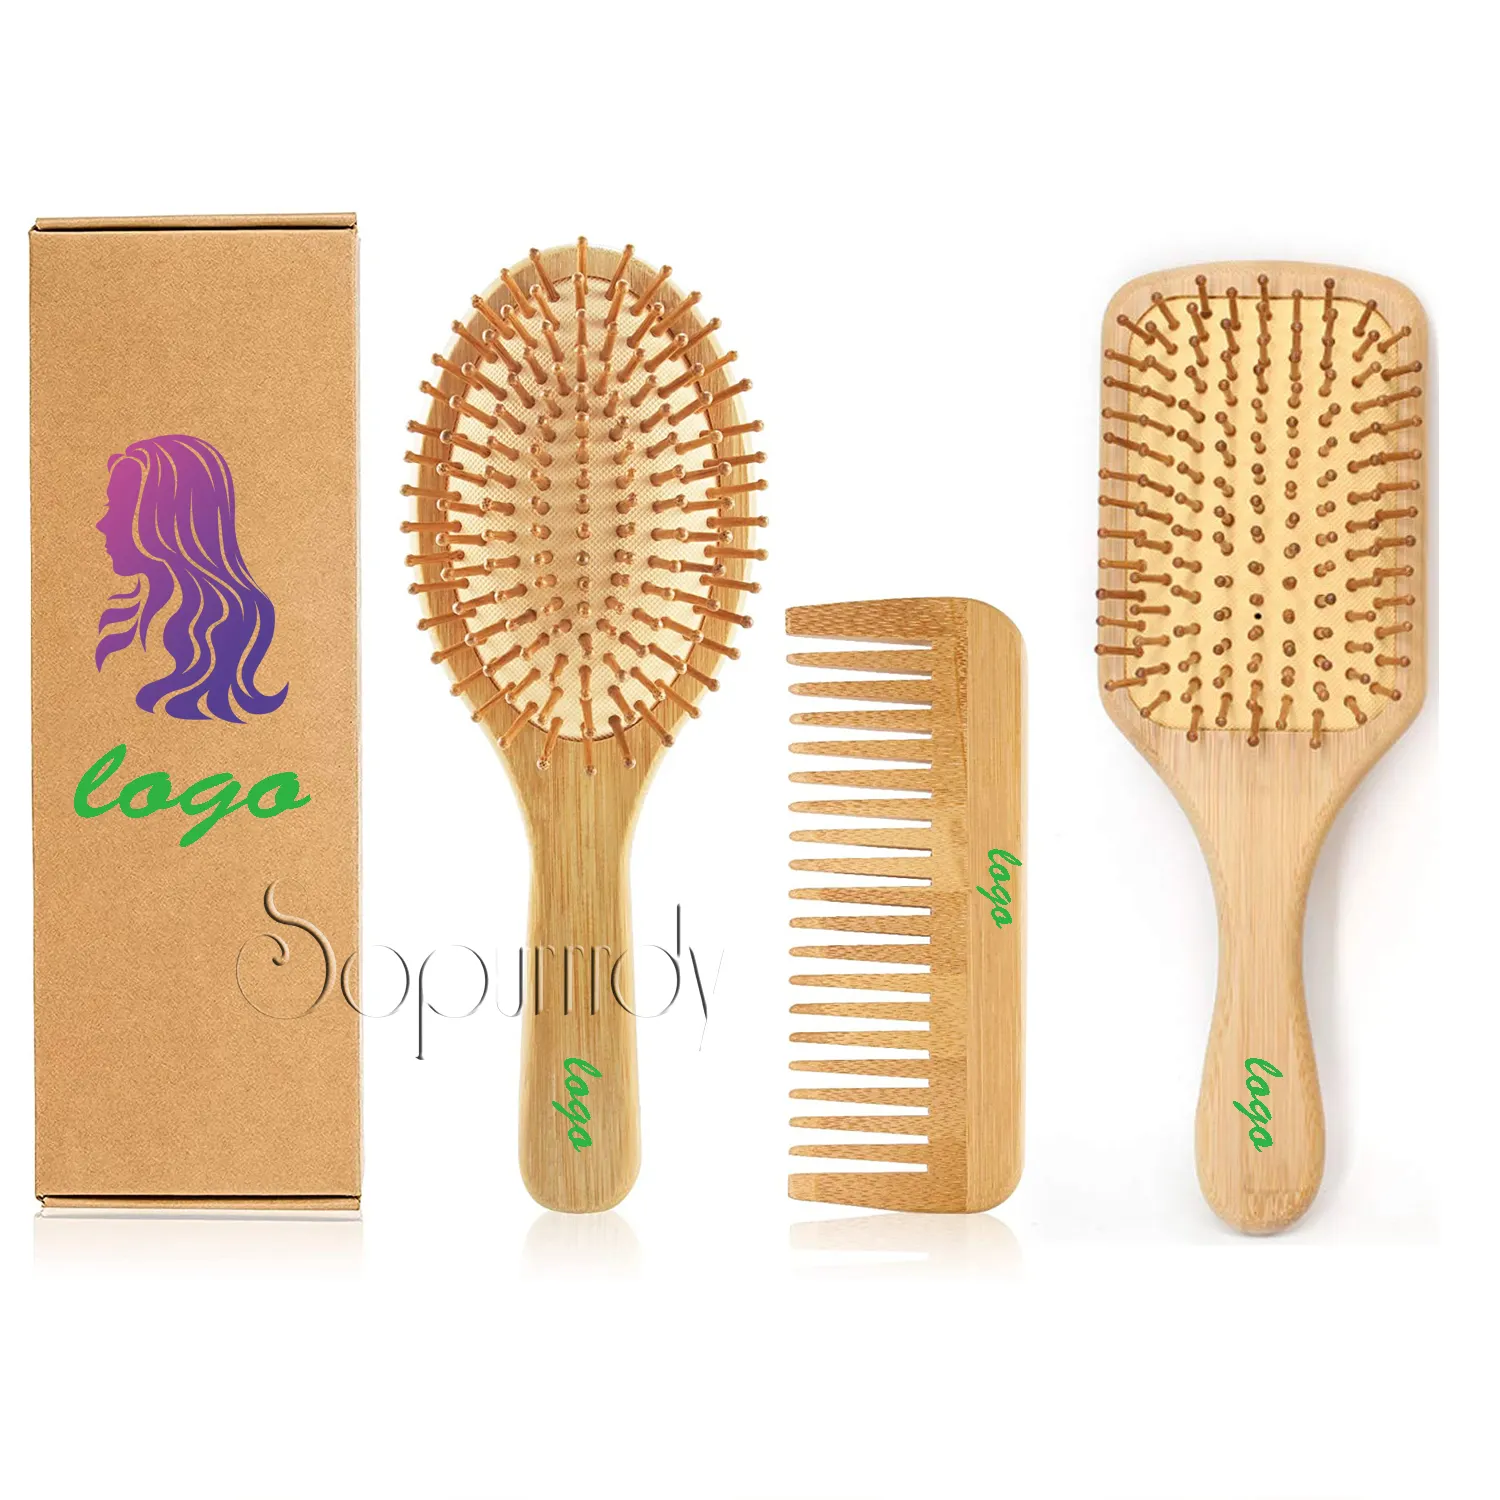 Low Moq Customized Eco-friendly Biodegradable Long Handle Natural Bamboo Wooden Massage Scalp Air Paddle Hair Brush